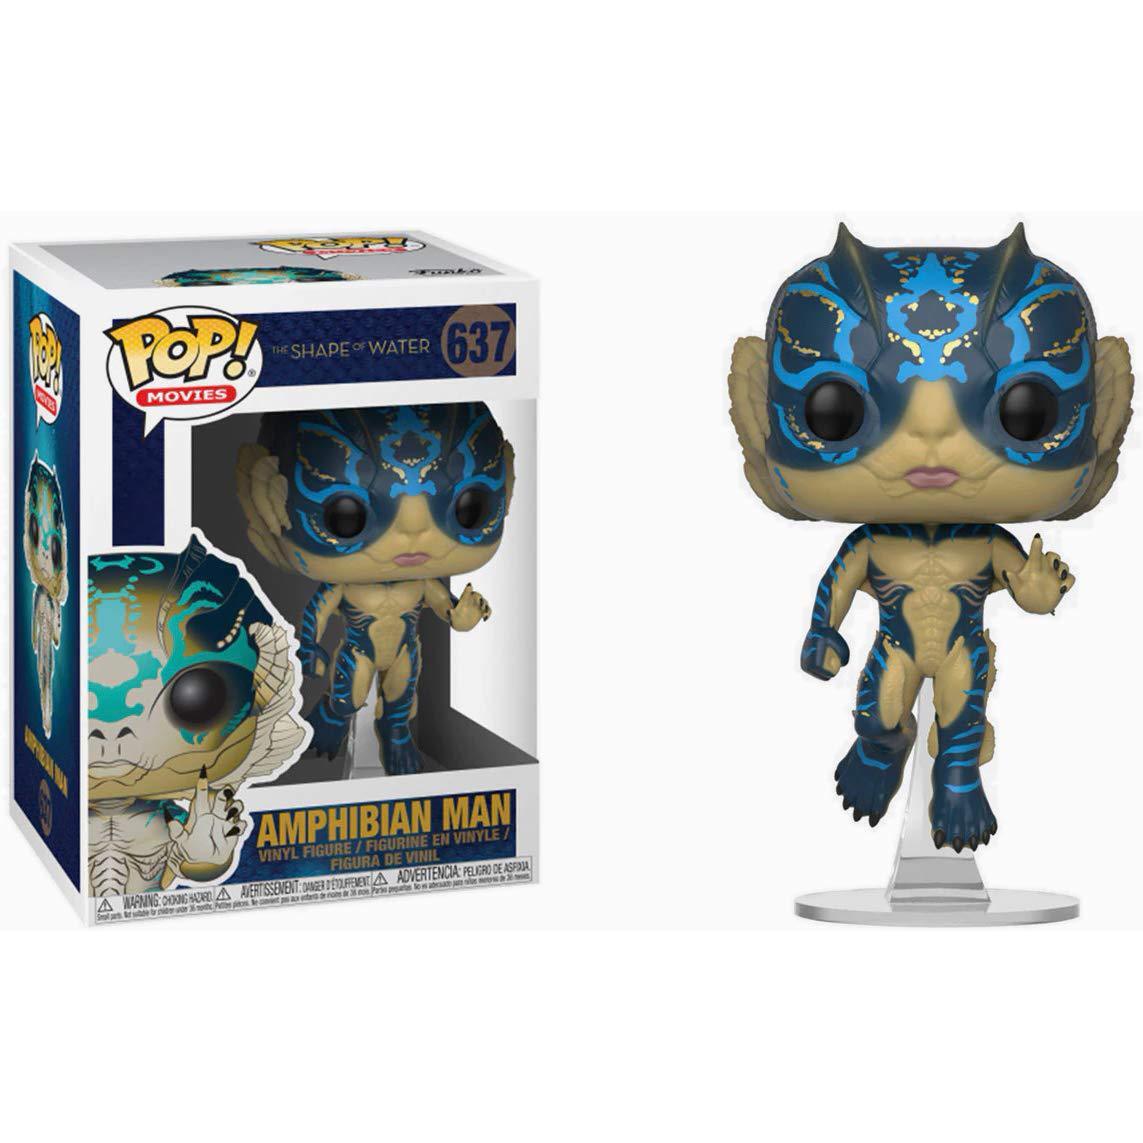 Funko Pop Movies: Shape of Water Amphibian 637 32485 sQ WH. In stock